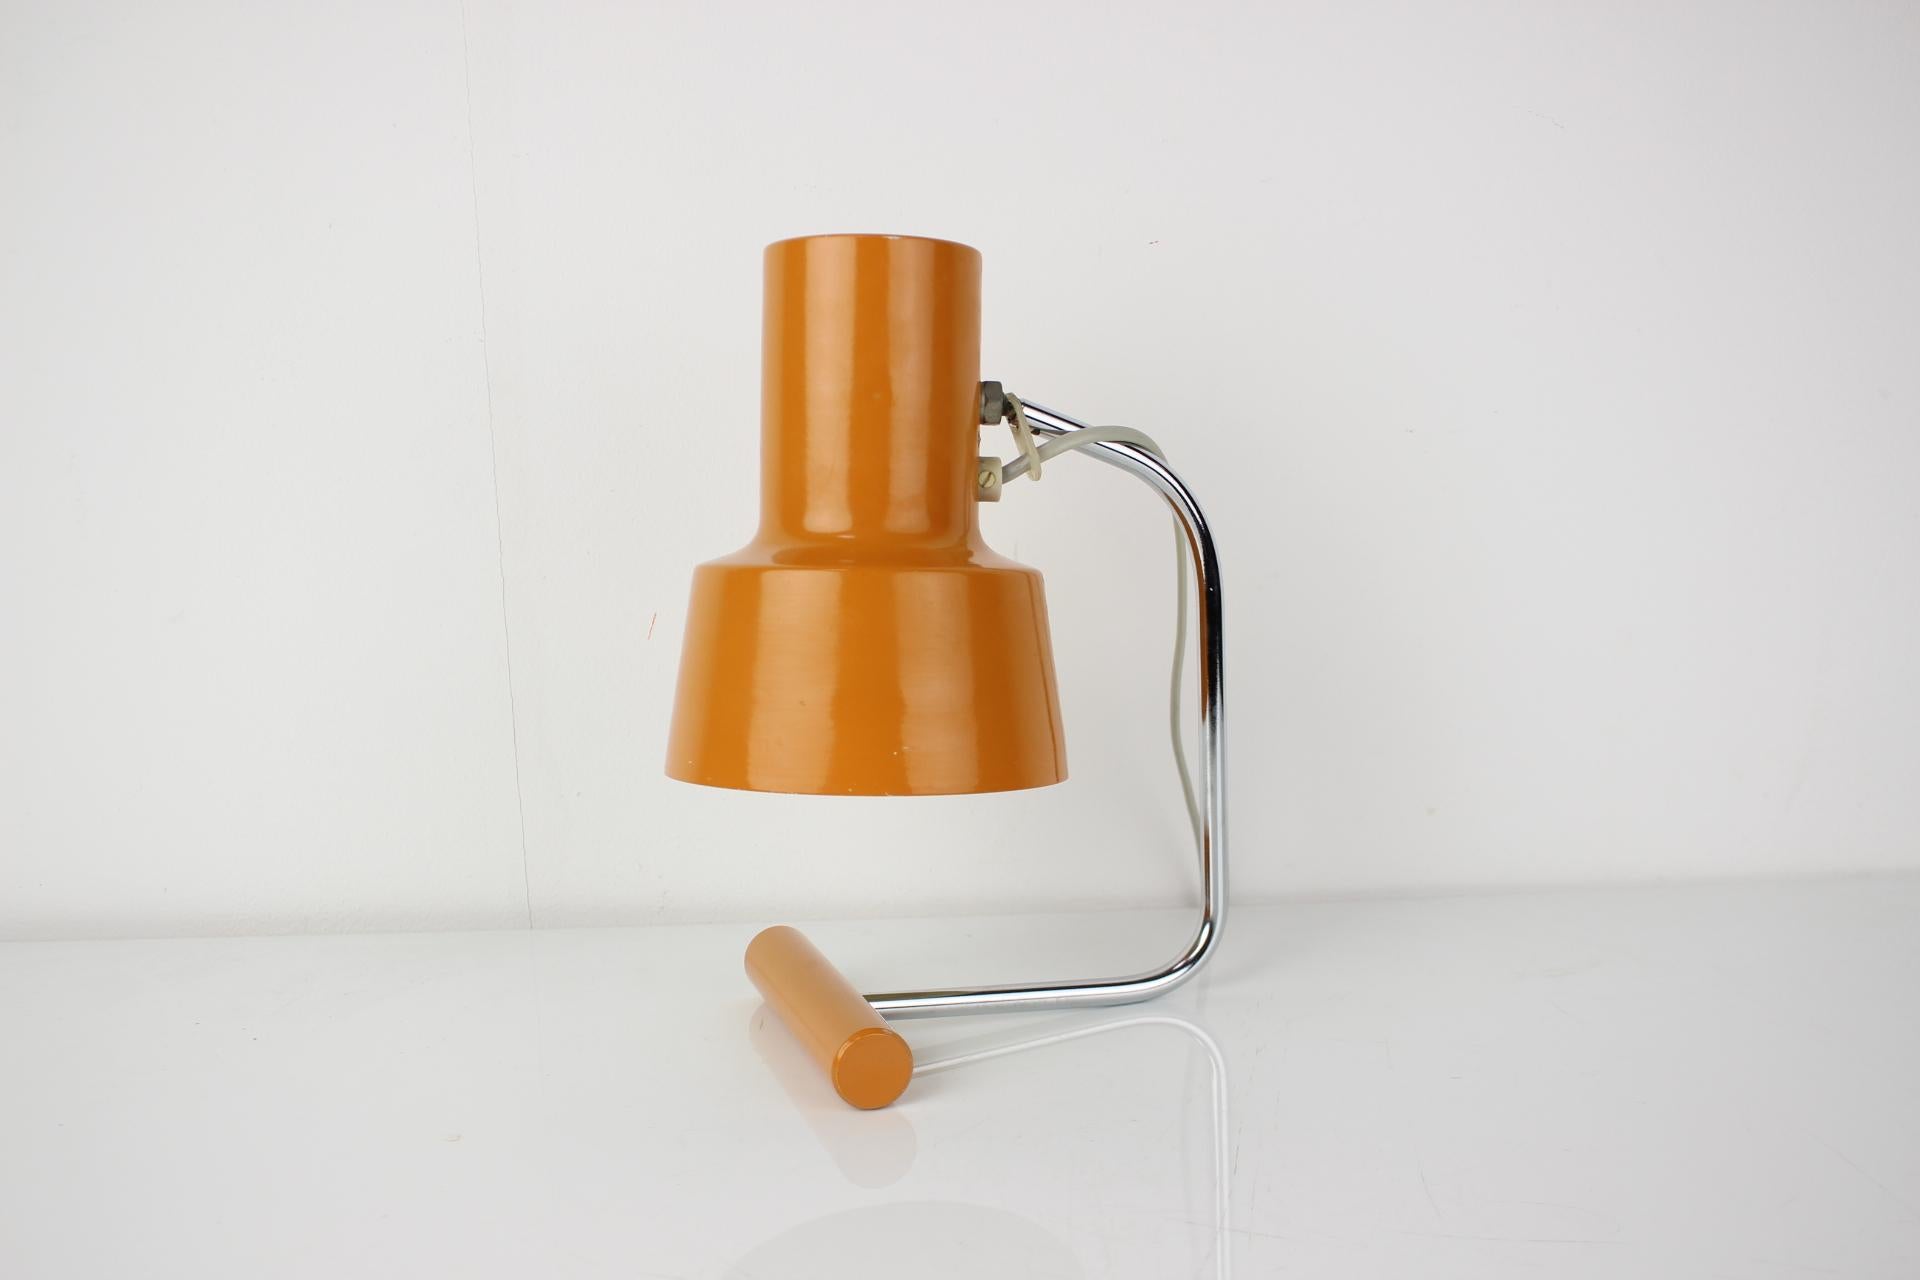 Czech Midcentury Table Lamp/Napako Designed by Josef Hurka, 1970s For Sale